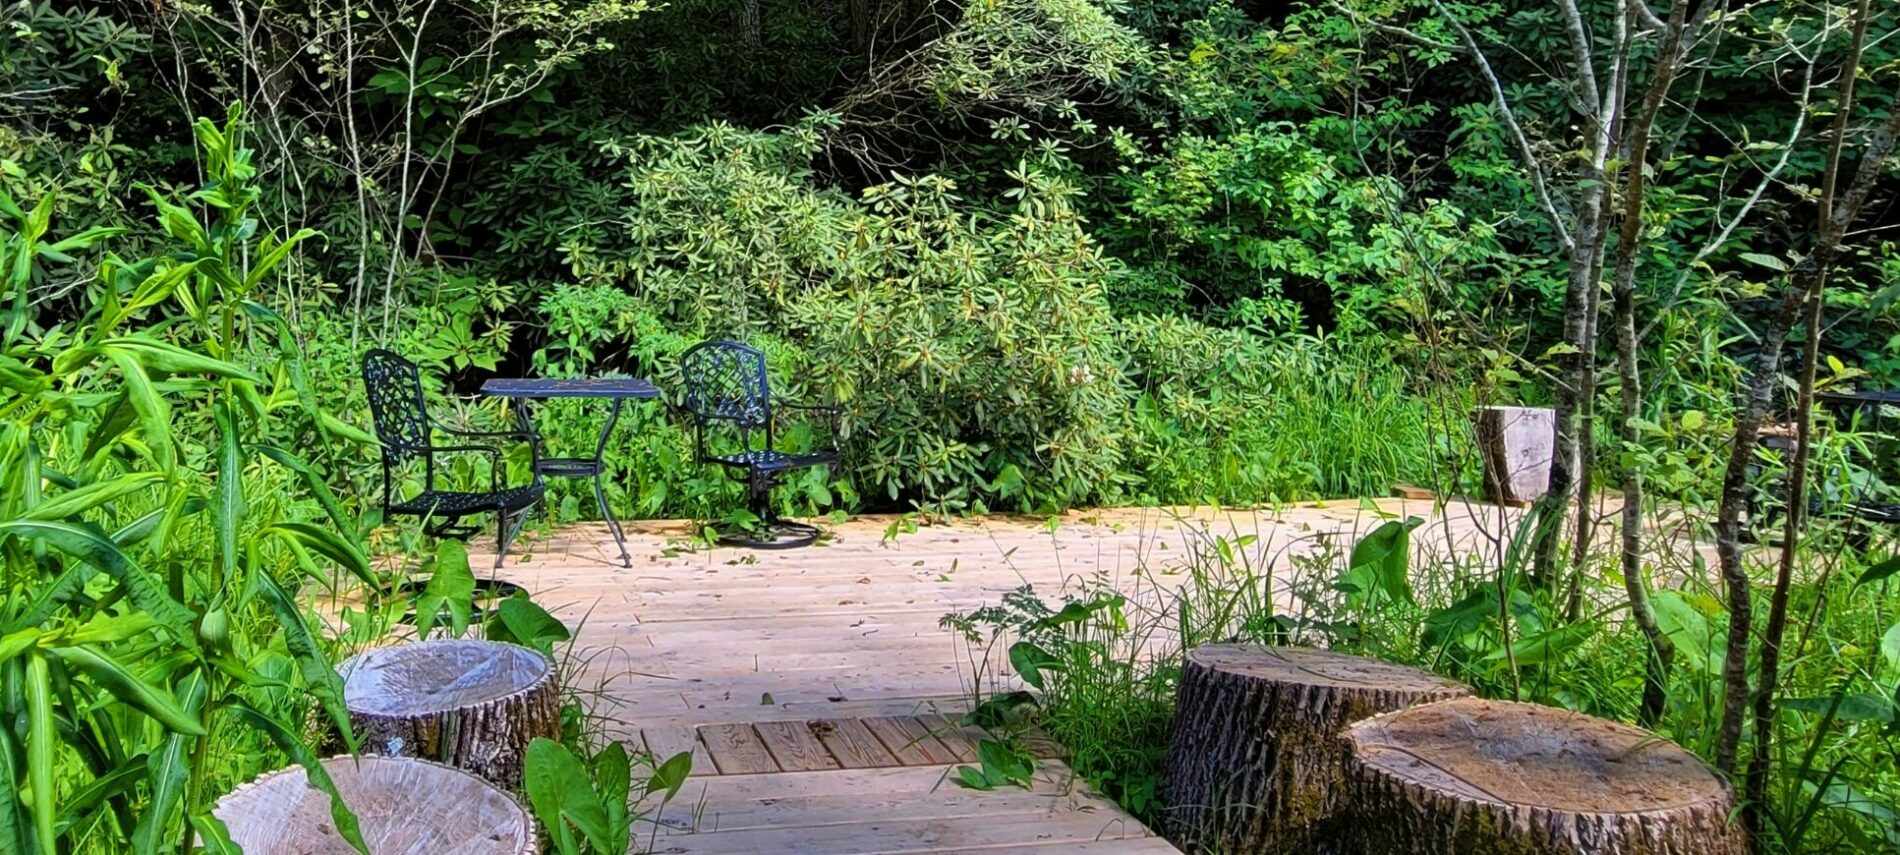 Wooden walkway leading to large seating deck surrounded by plants